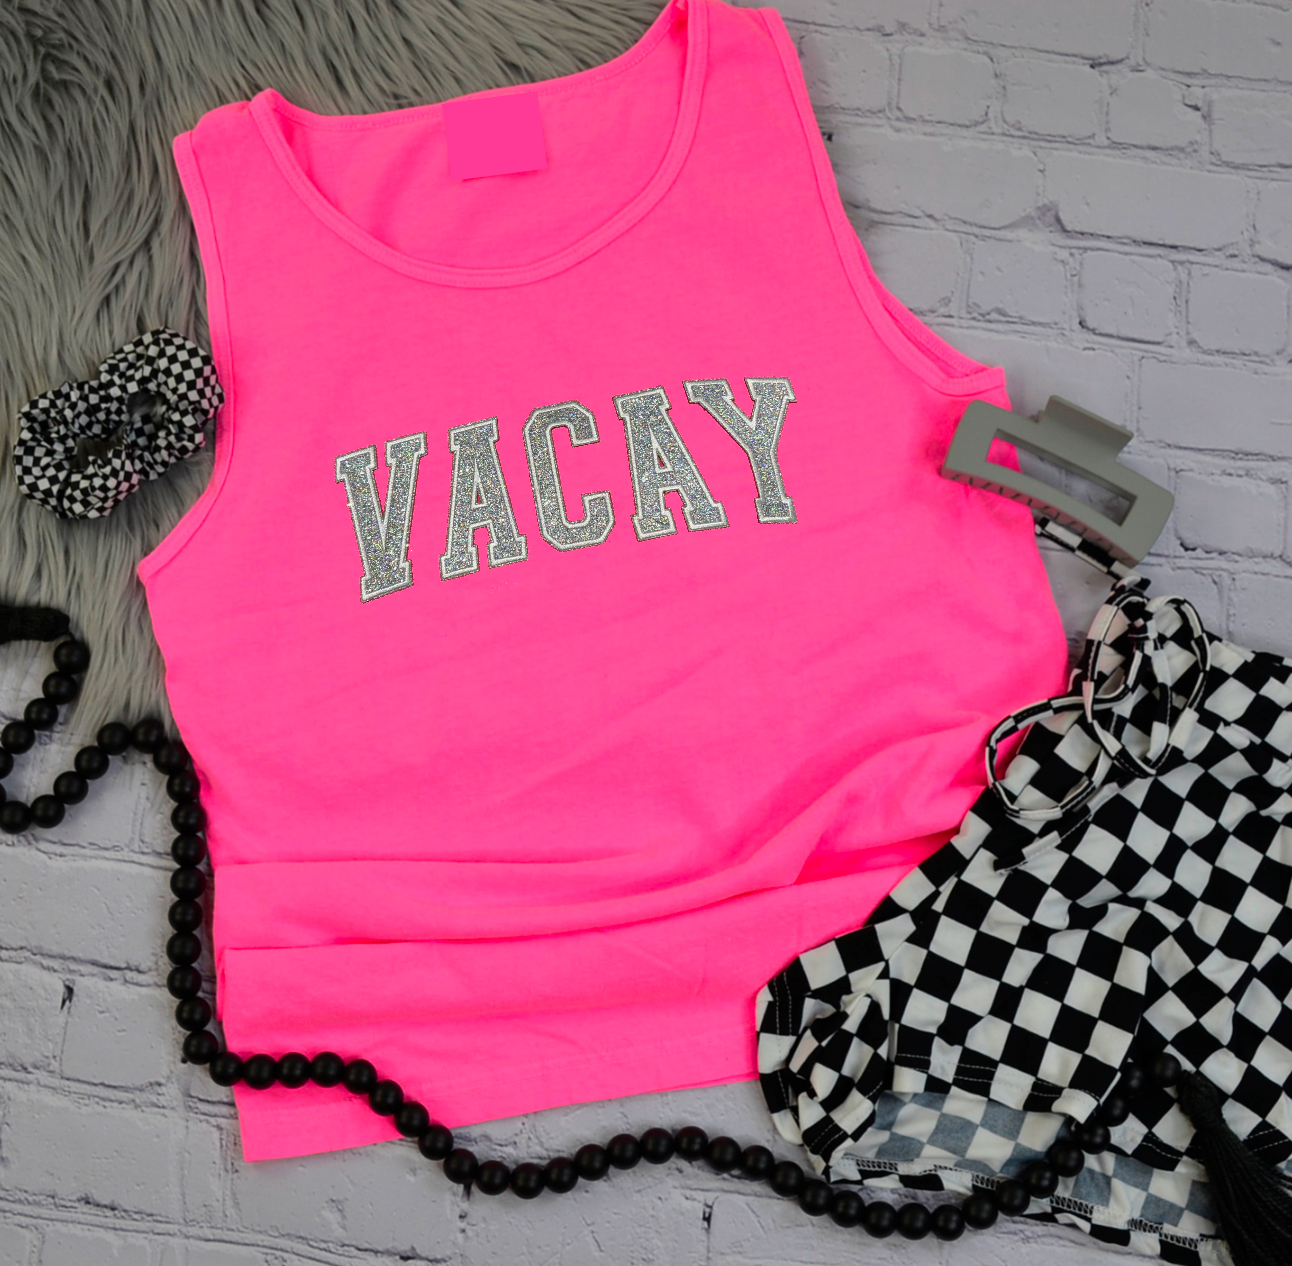 VACAY Glitter Embroidered Patch Neon Pink Tops